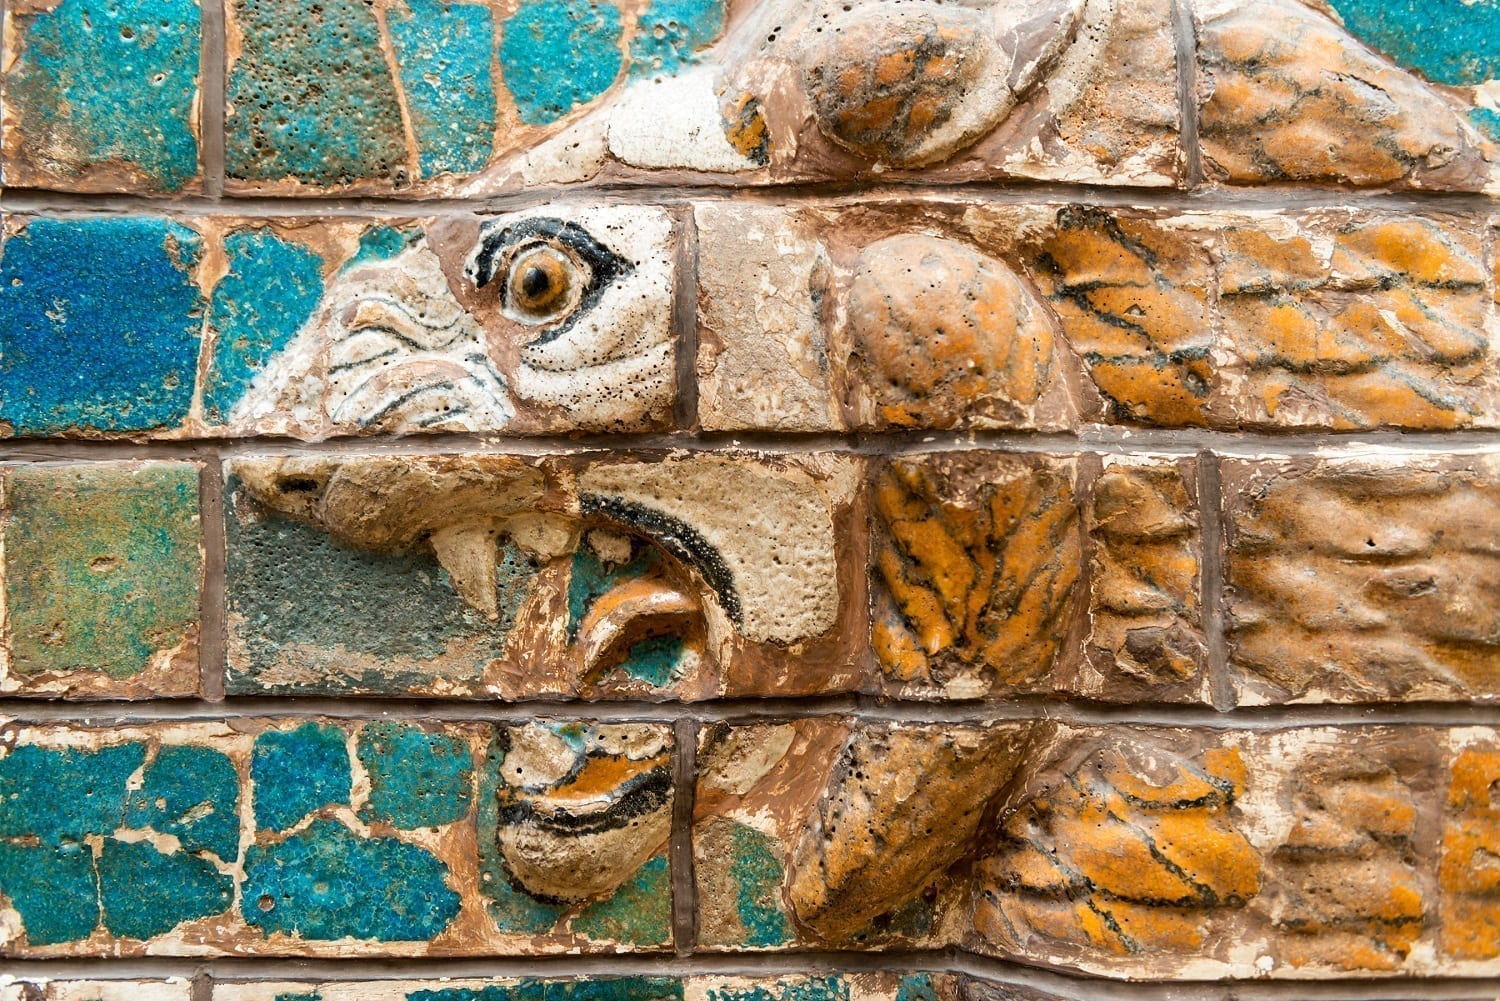 Ishtar gate of Babylon close up of lion relief painted bricks: ID 32270435 © Scaliger | Dreamstime.com